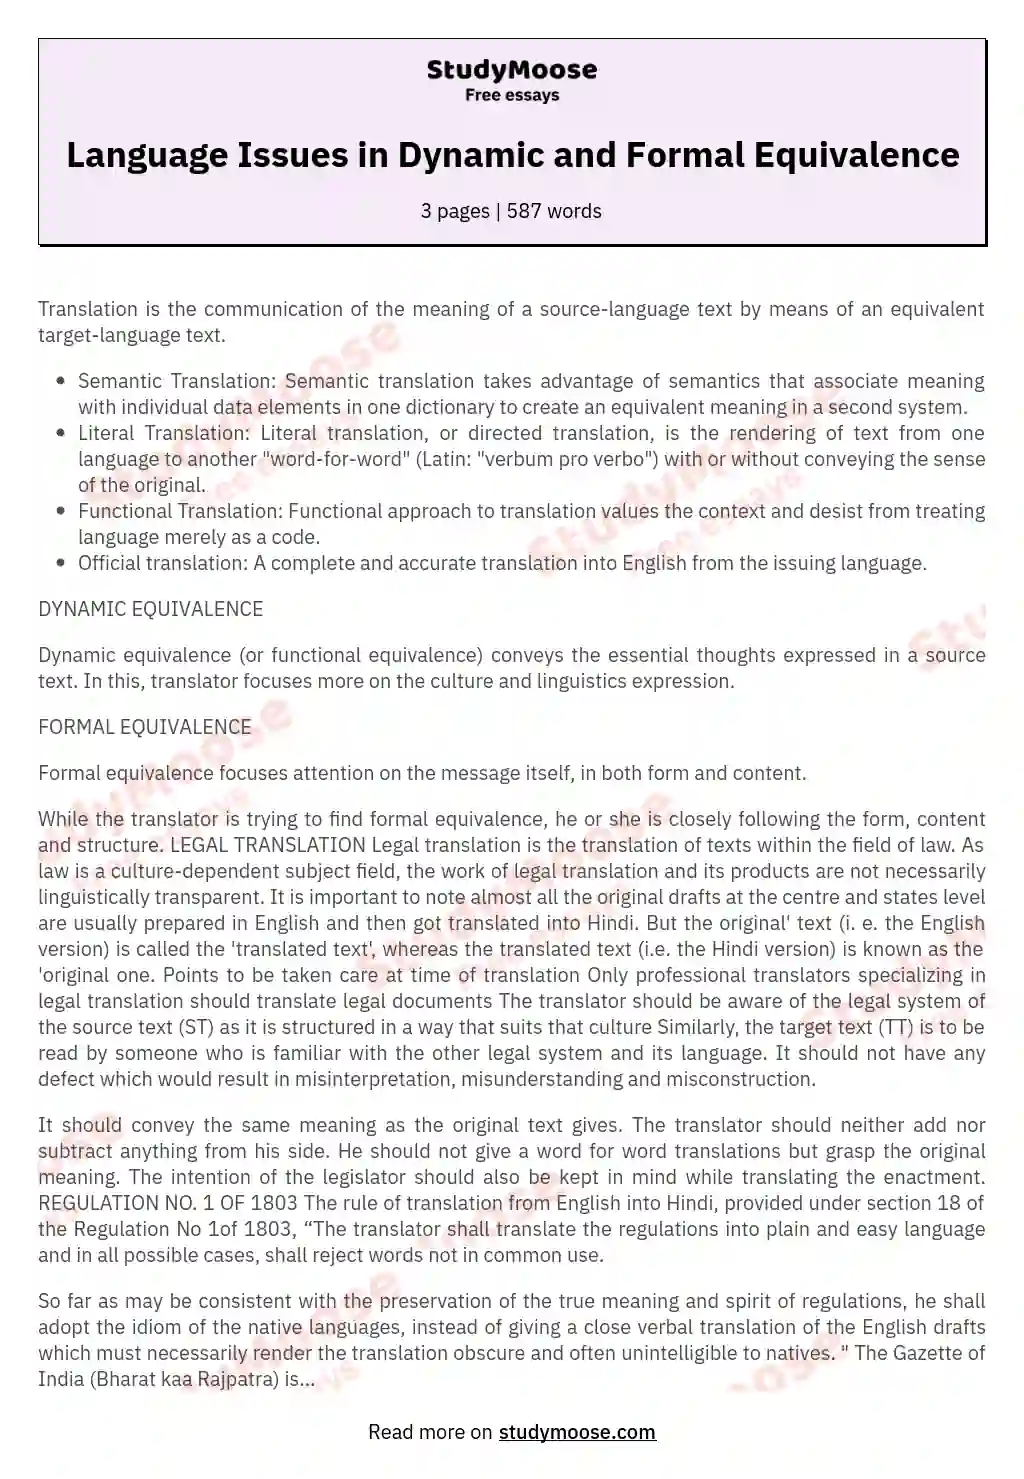 Language Issues in Dynamic and Formal Equivalence essay